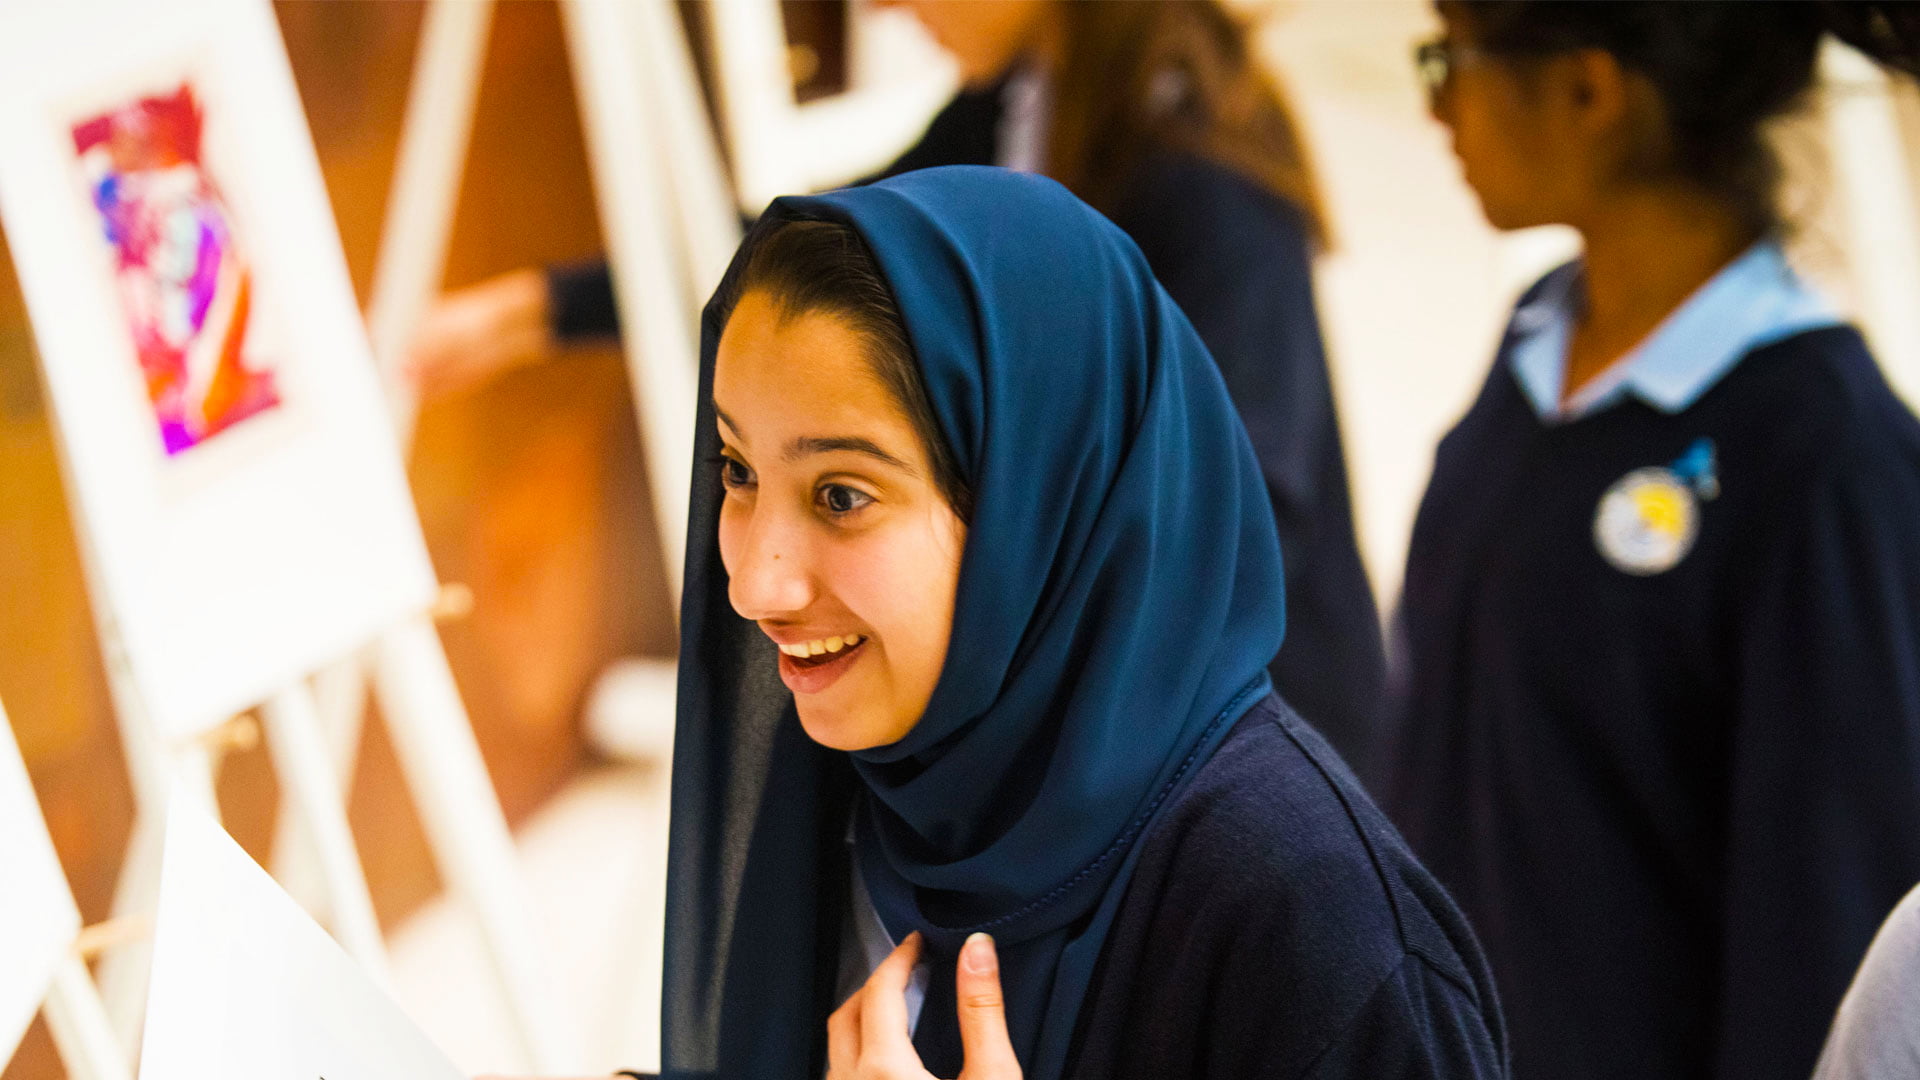 Image of an Arabic girl in awe at the quality of an Art exhibition at the British School Al Khubairat